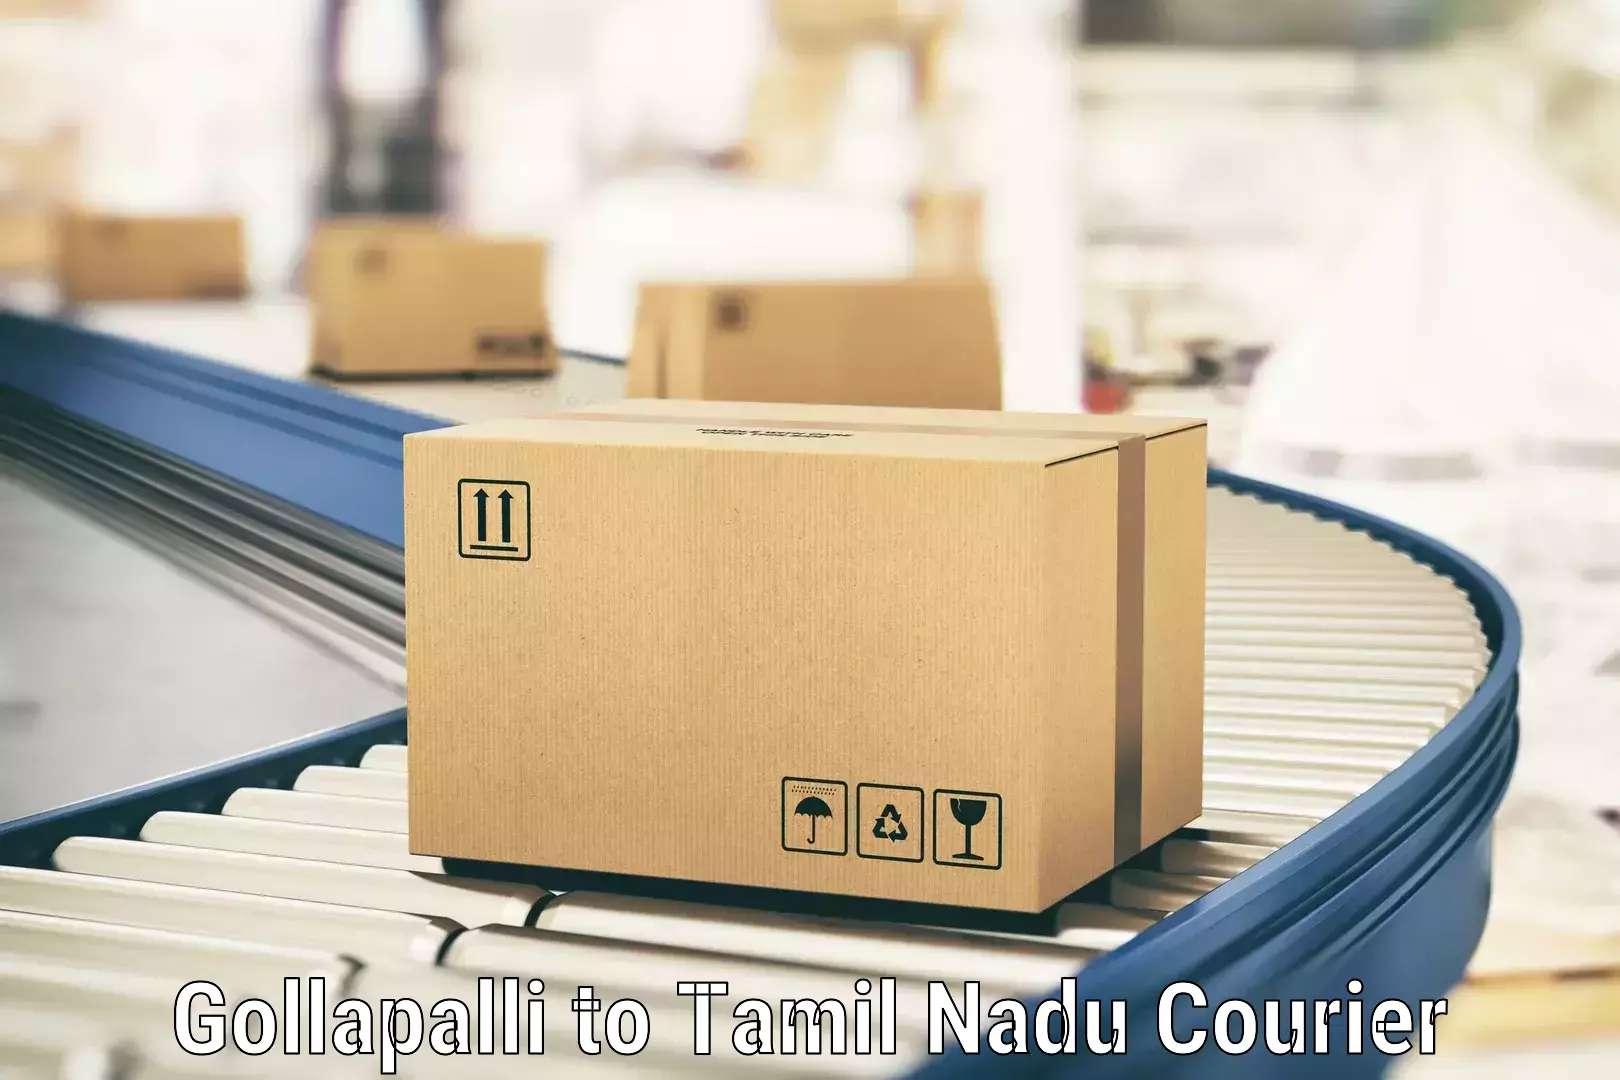 Flexible delivery scheduling Gollapalli to Tirunelveli